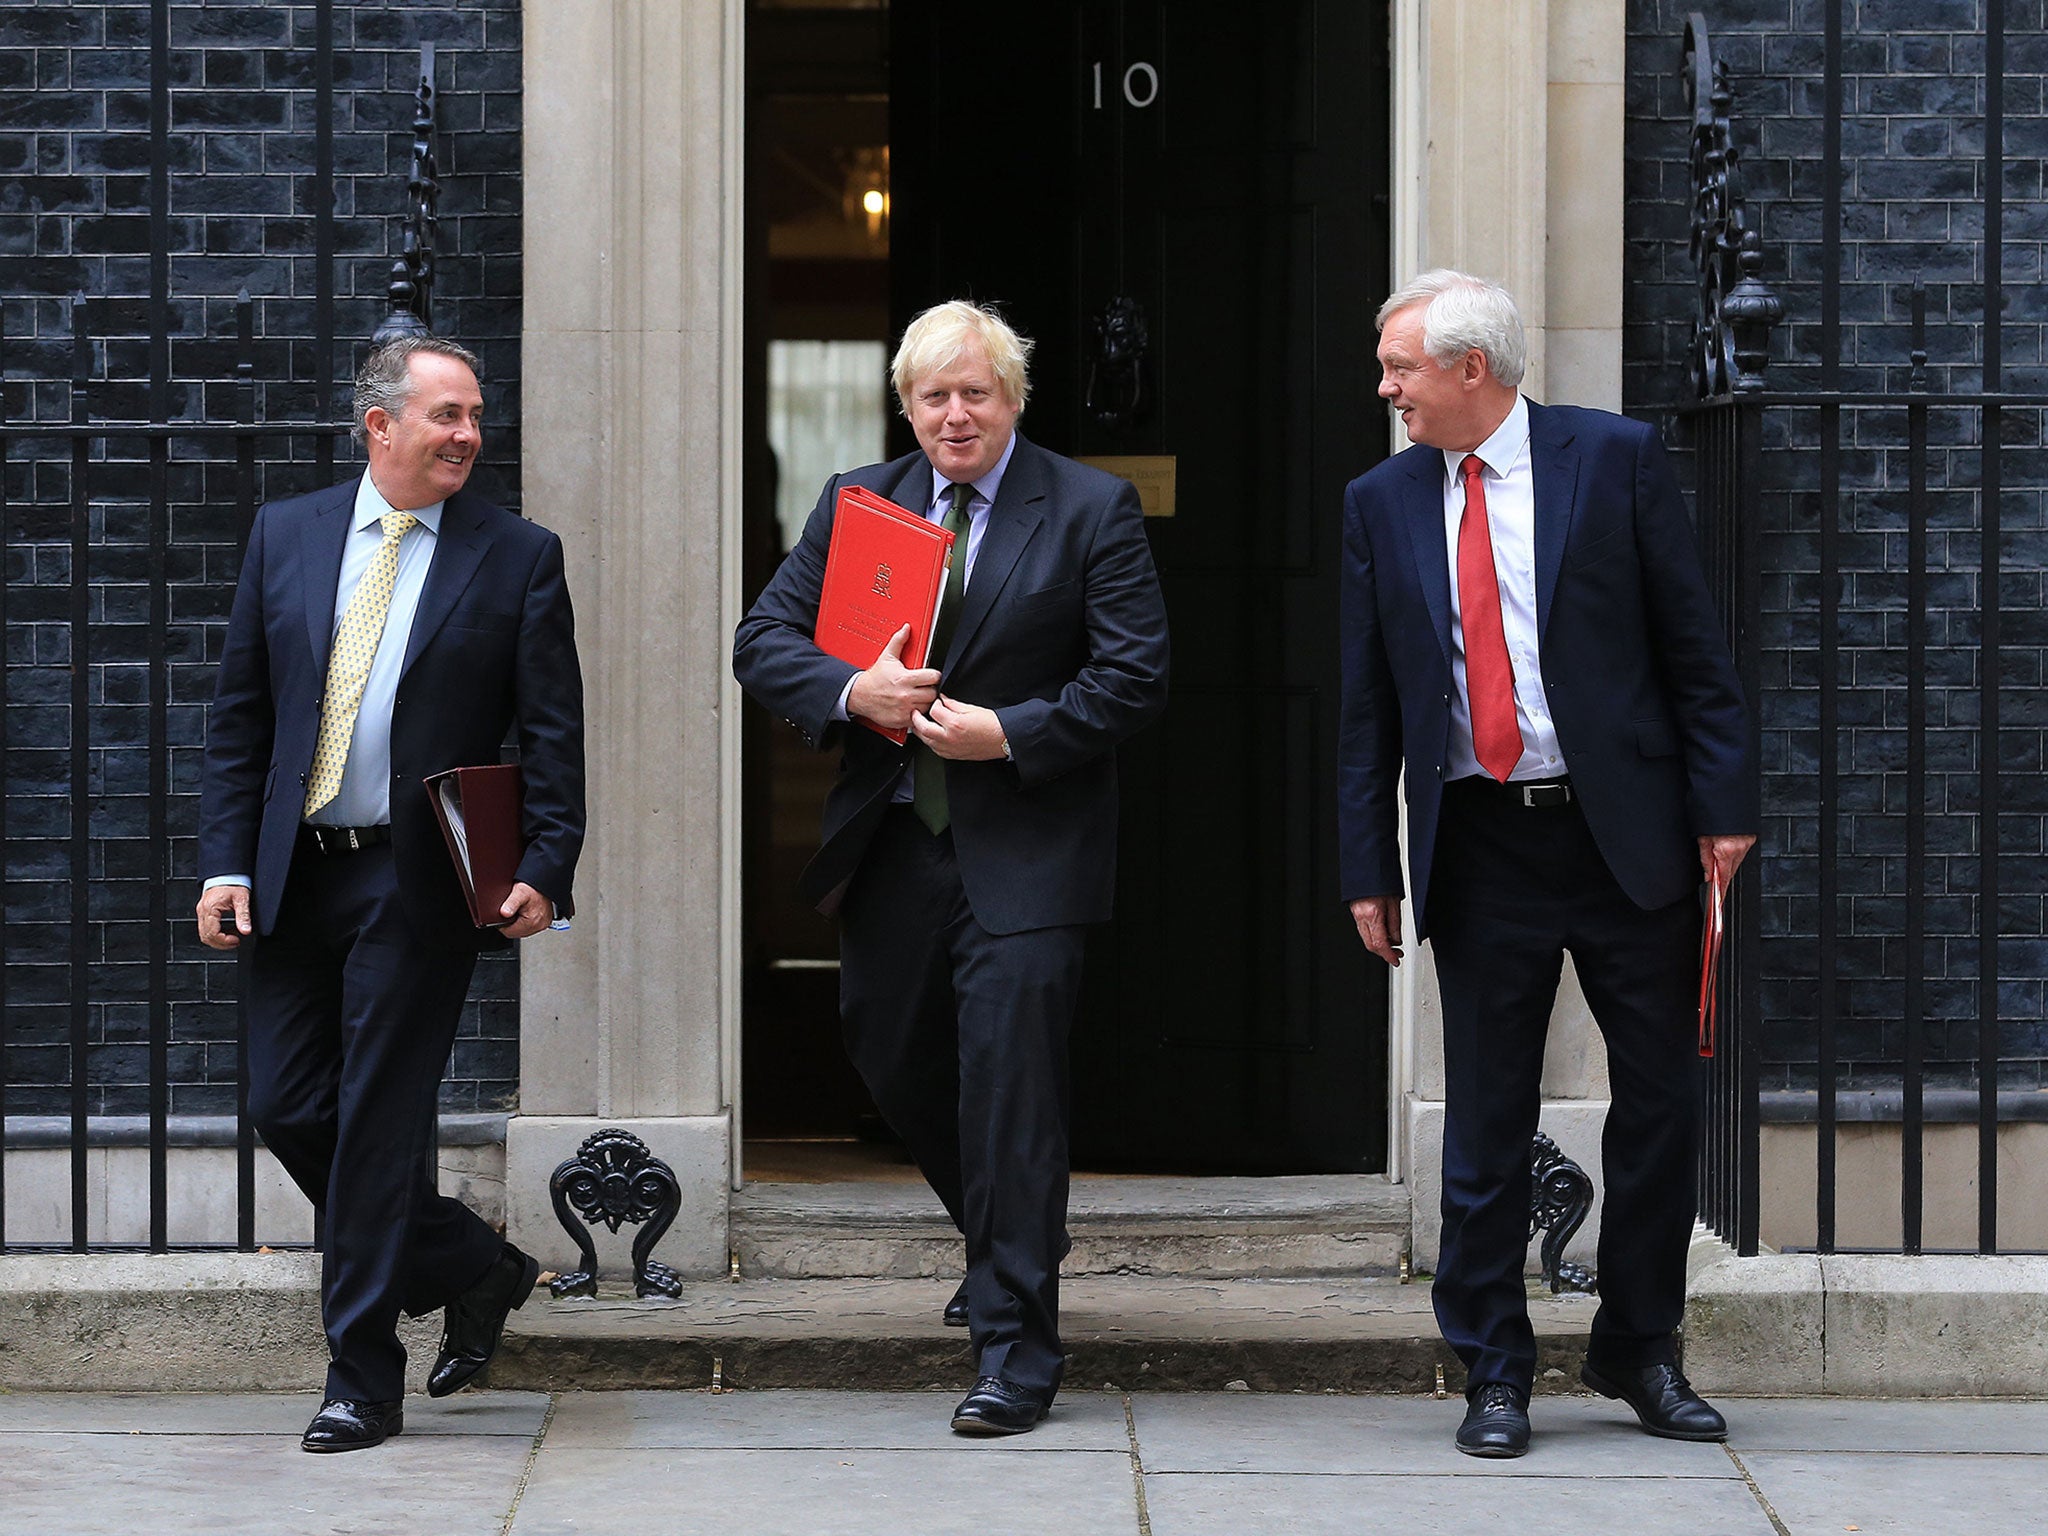 The ‘three Brexiteers’, including Mr Davis, right, leave Downing Street yesterday after a Cabinet meeting